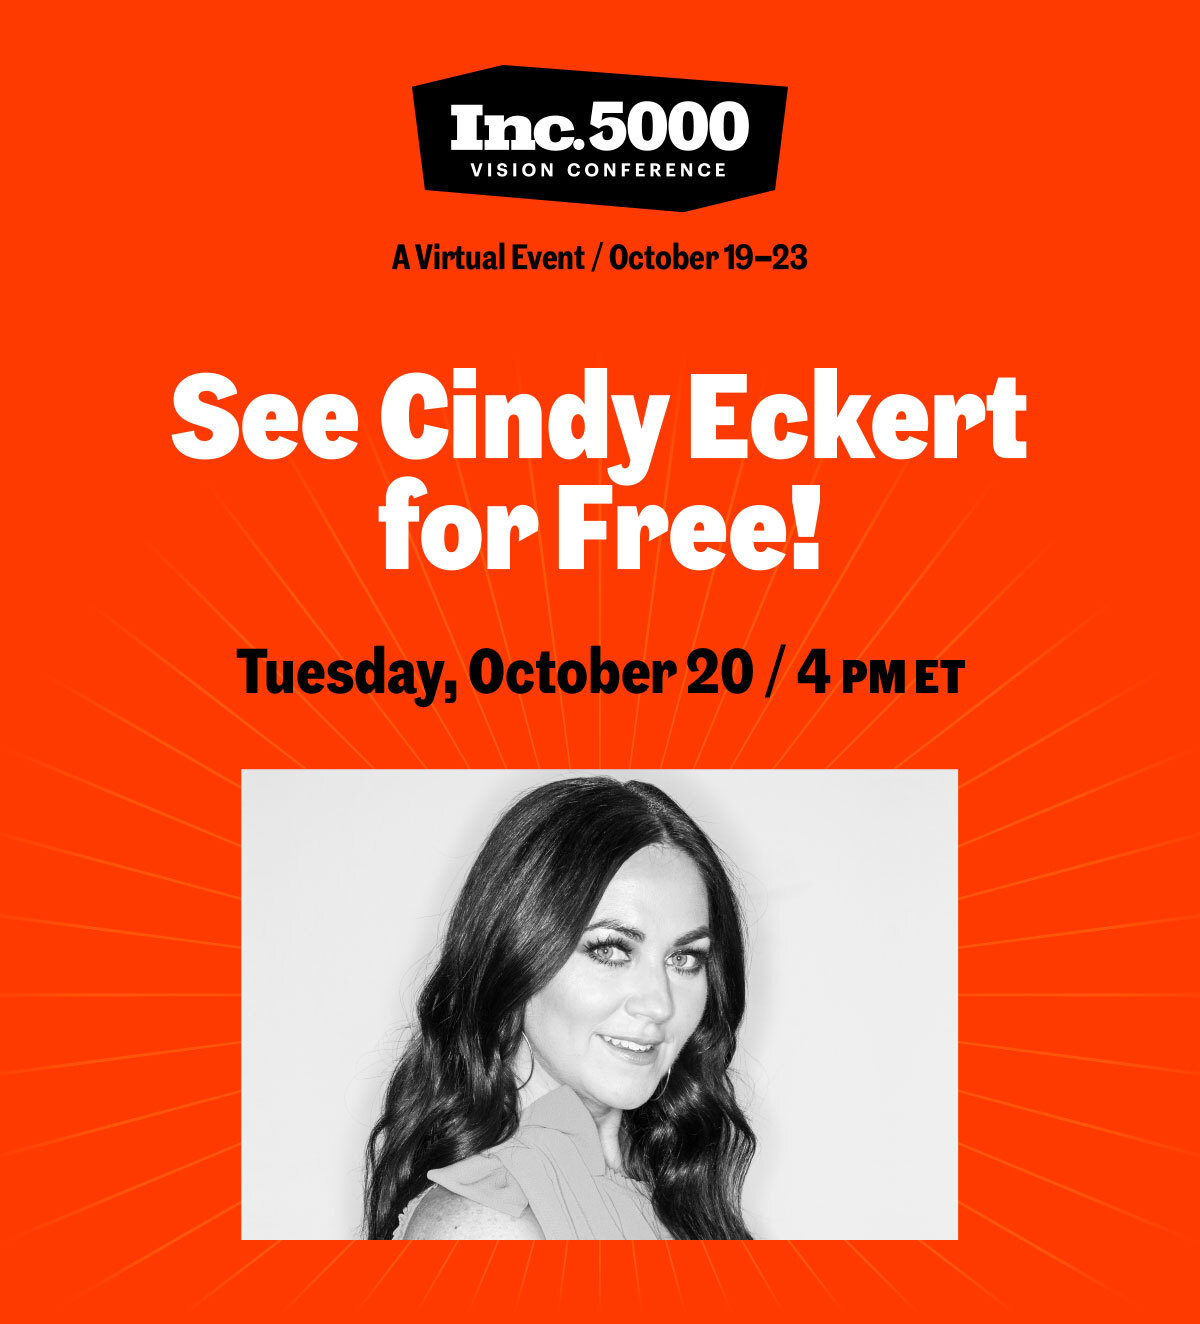 Inc. 5000 Vision Conference | See Cindy Eckert for Free! | Friday, October 23 at 3:00 PM ET